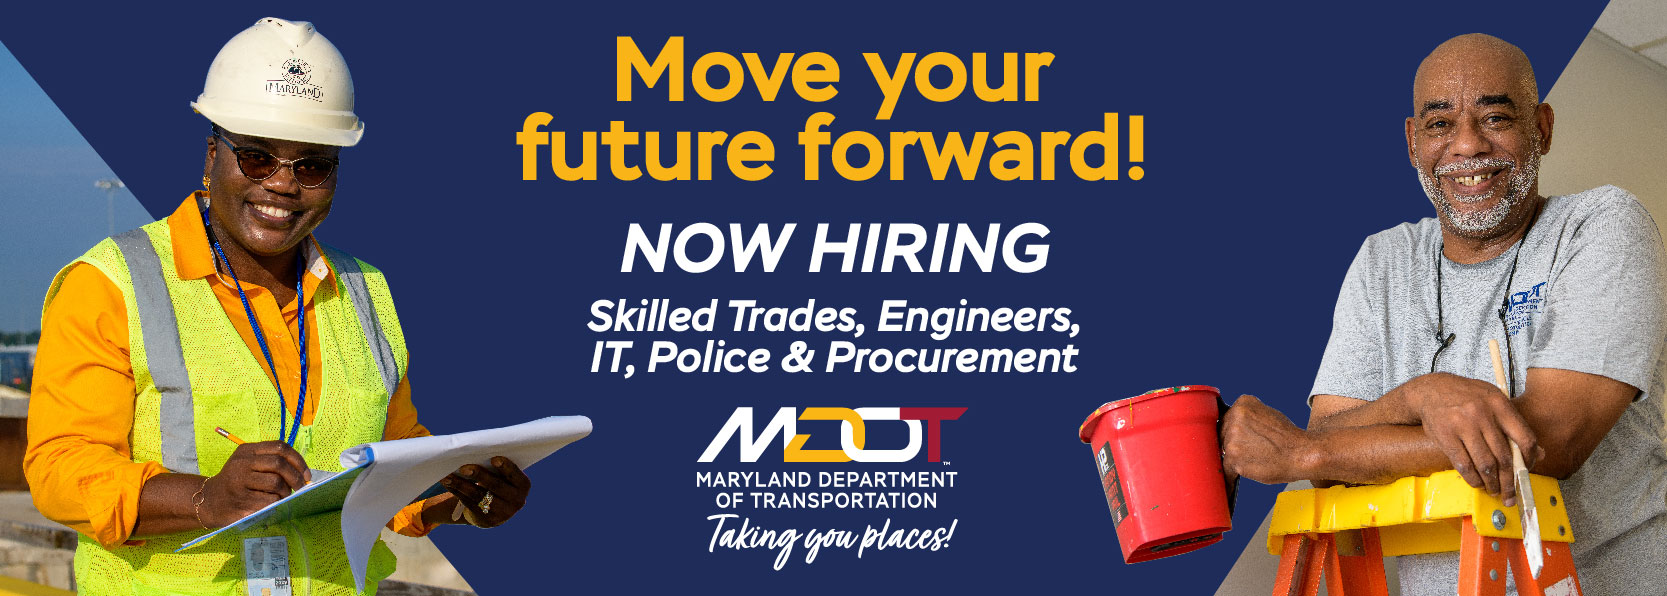 Move your future forward! NOW HIRING - Skilled Trades, Engineers, IT, Police and Procurement - MDOT